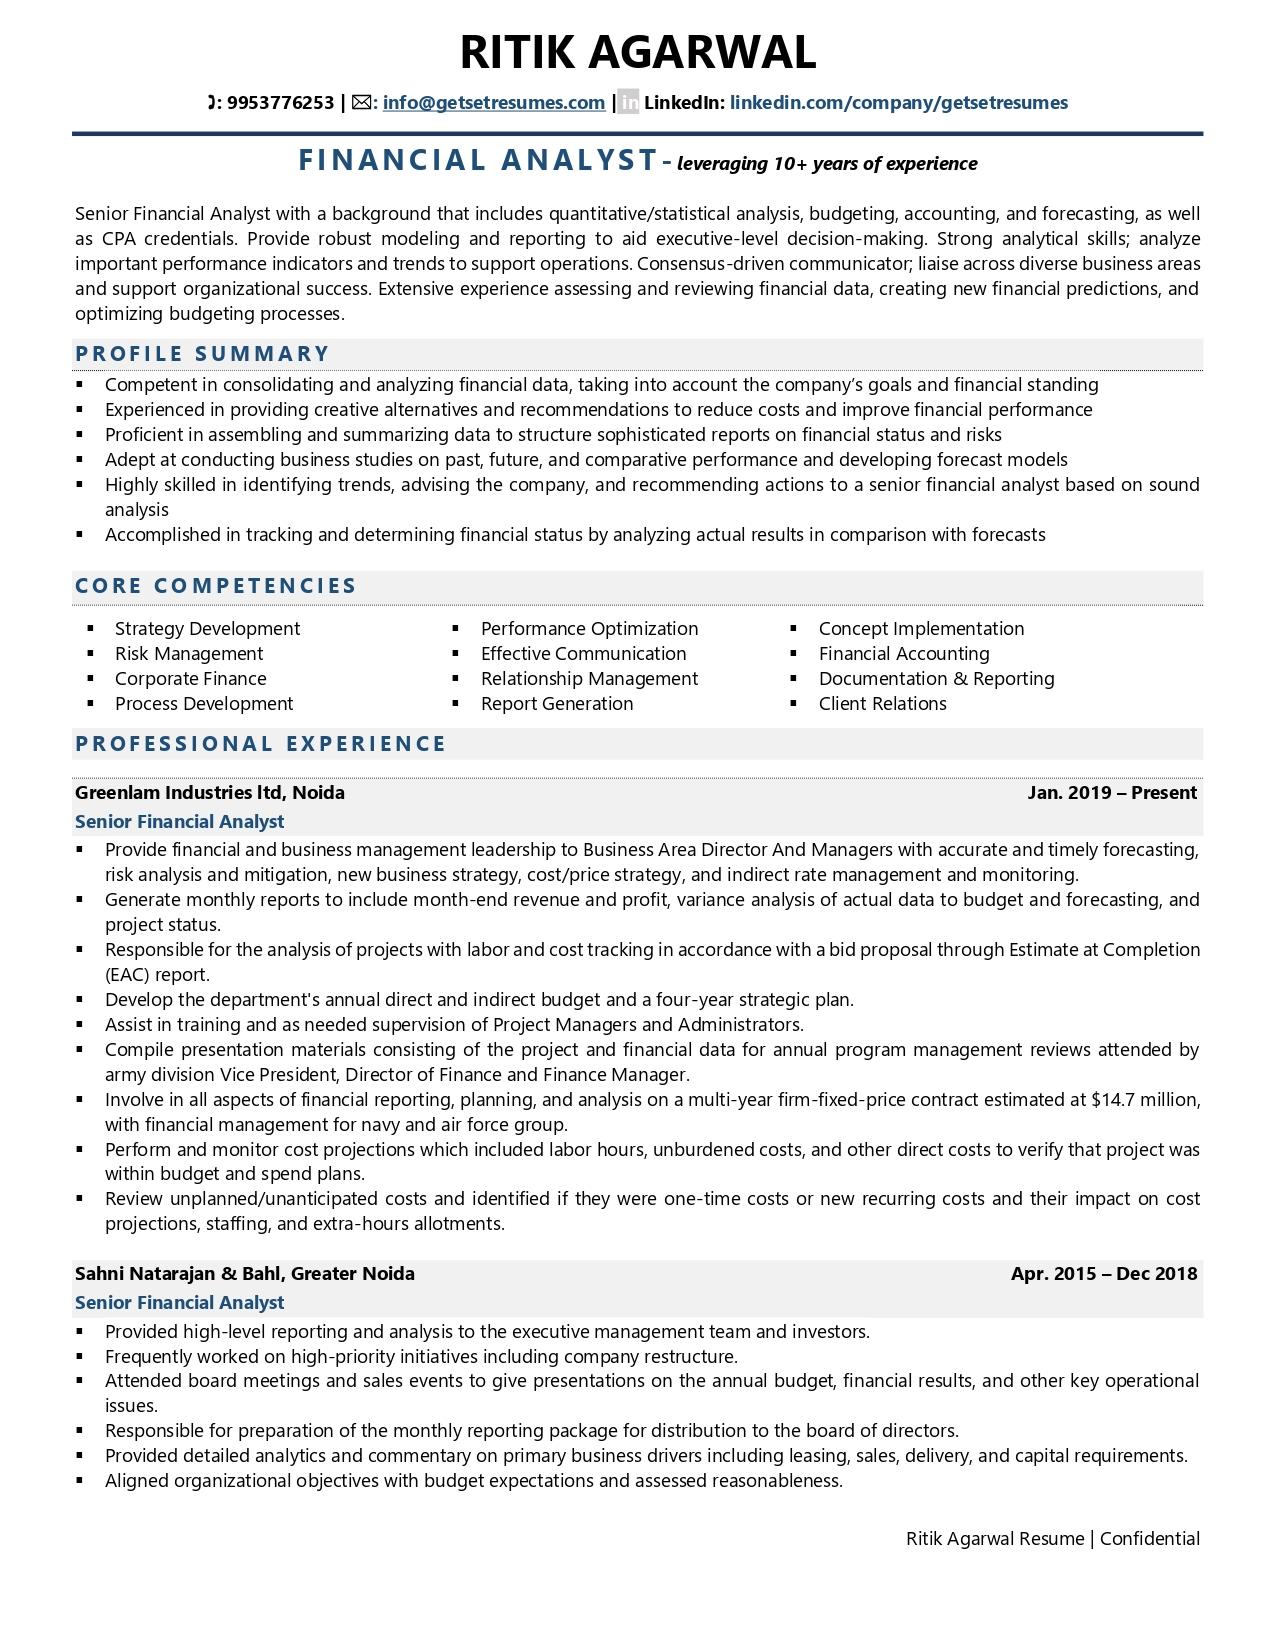 financial services experience resume samples